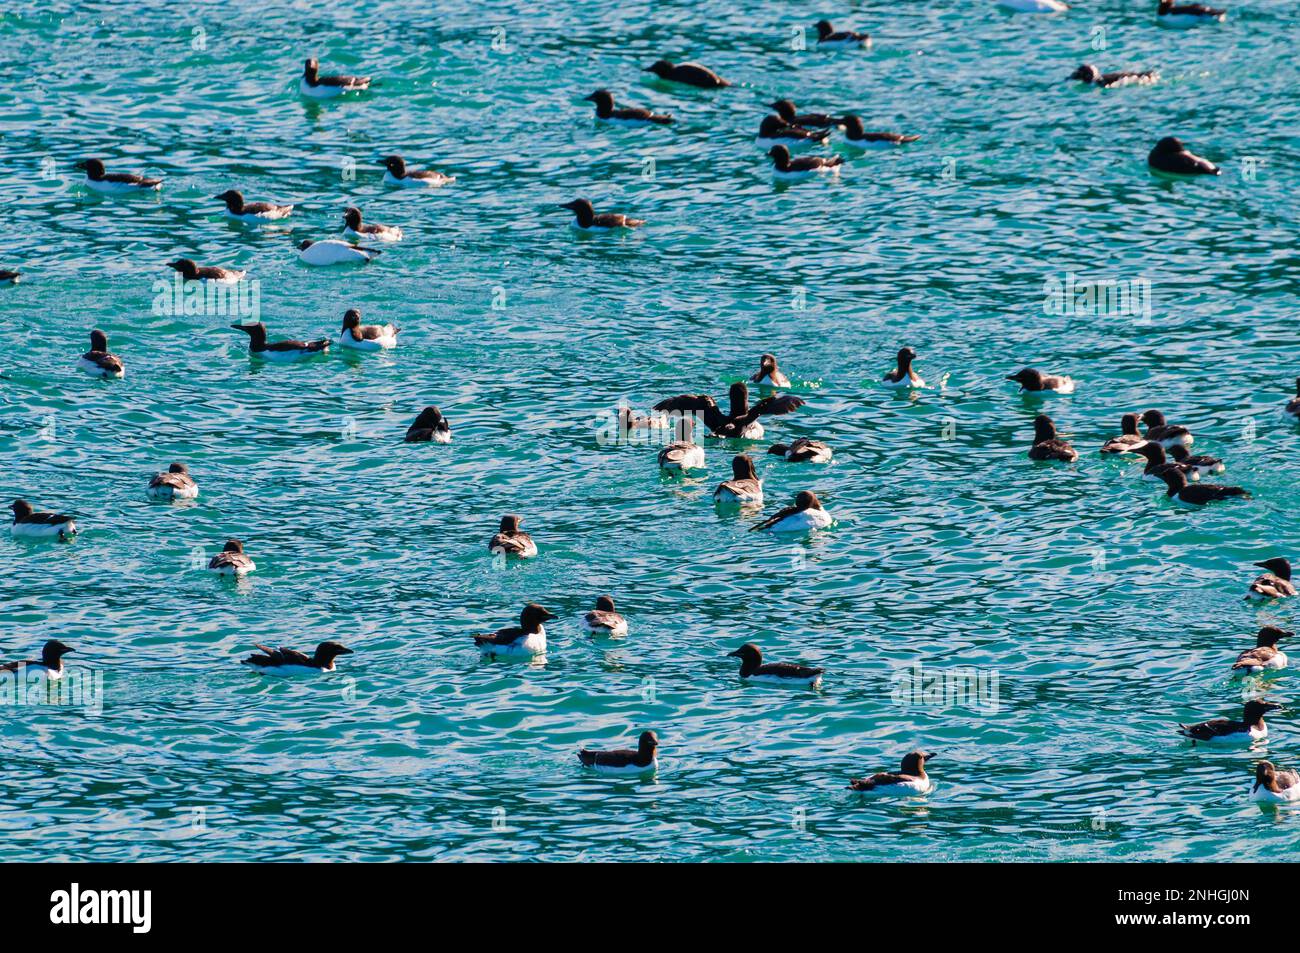 Countless birds floating in the blue green arctic waters under the ledges of Kapp Fanshawe in the Svalbard Islands of Norway Stock Photo